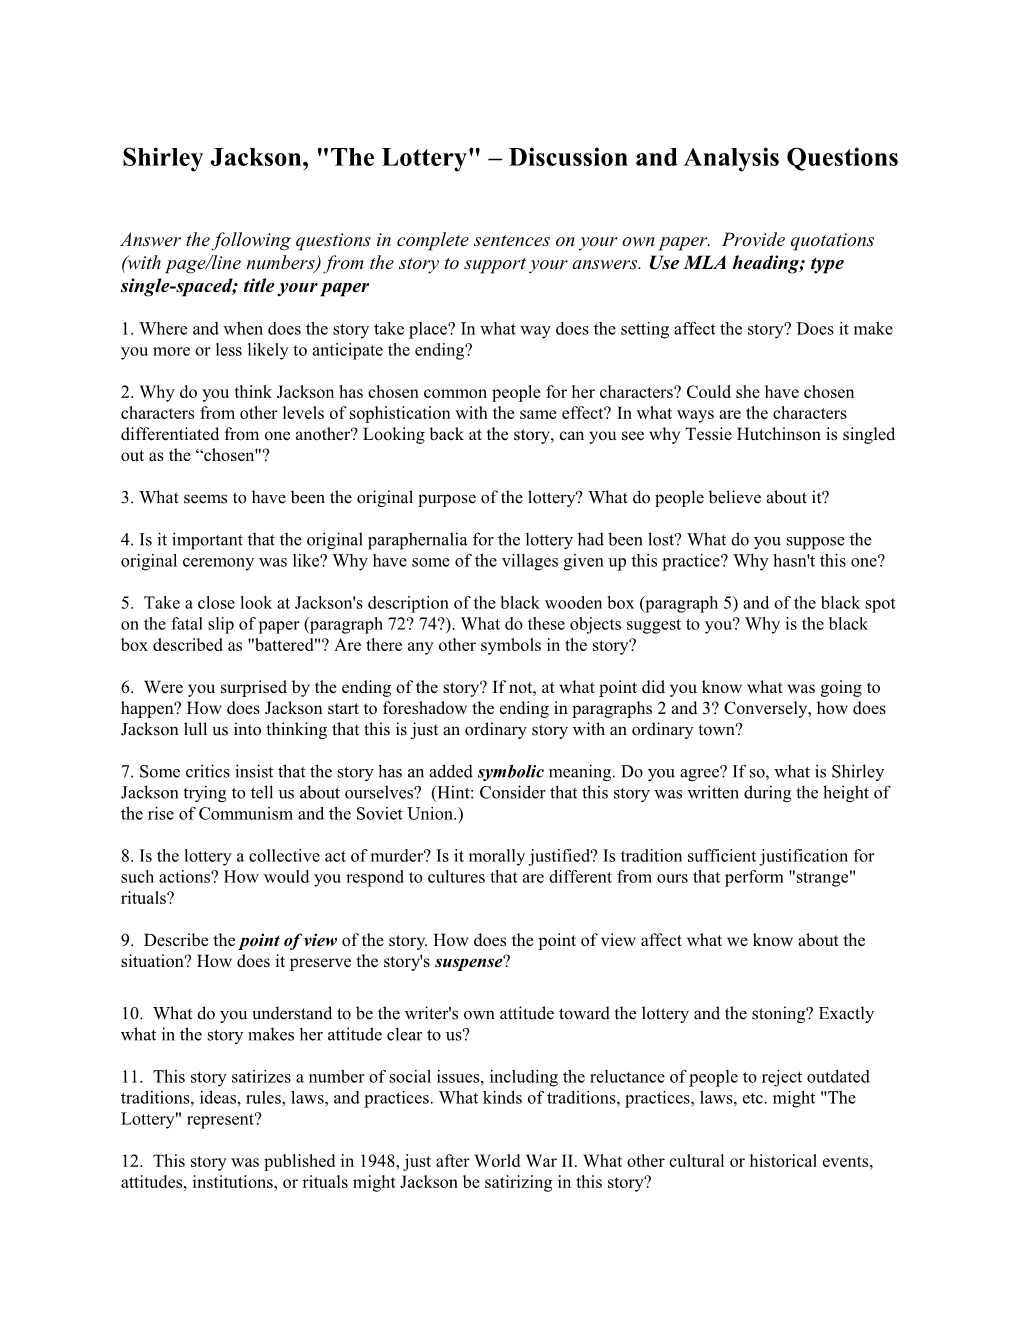 Shirley Jackson, the Lottery Discussion and Analysis Questions